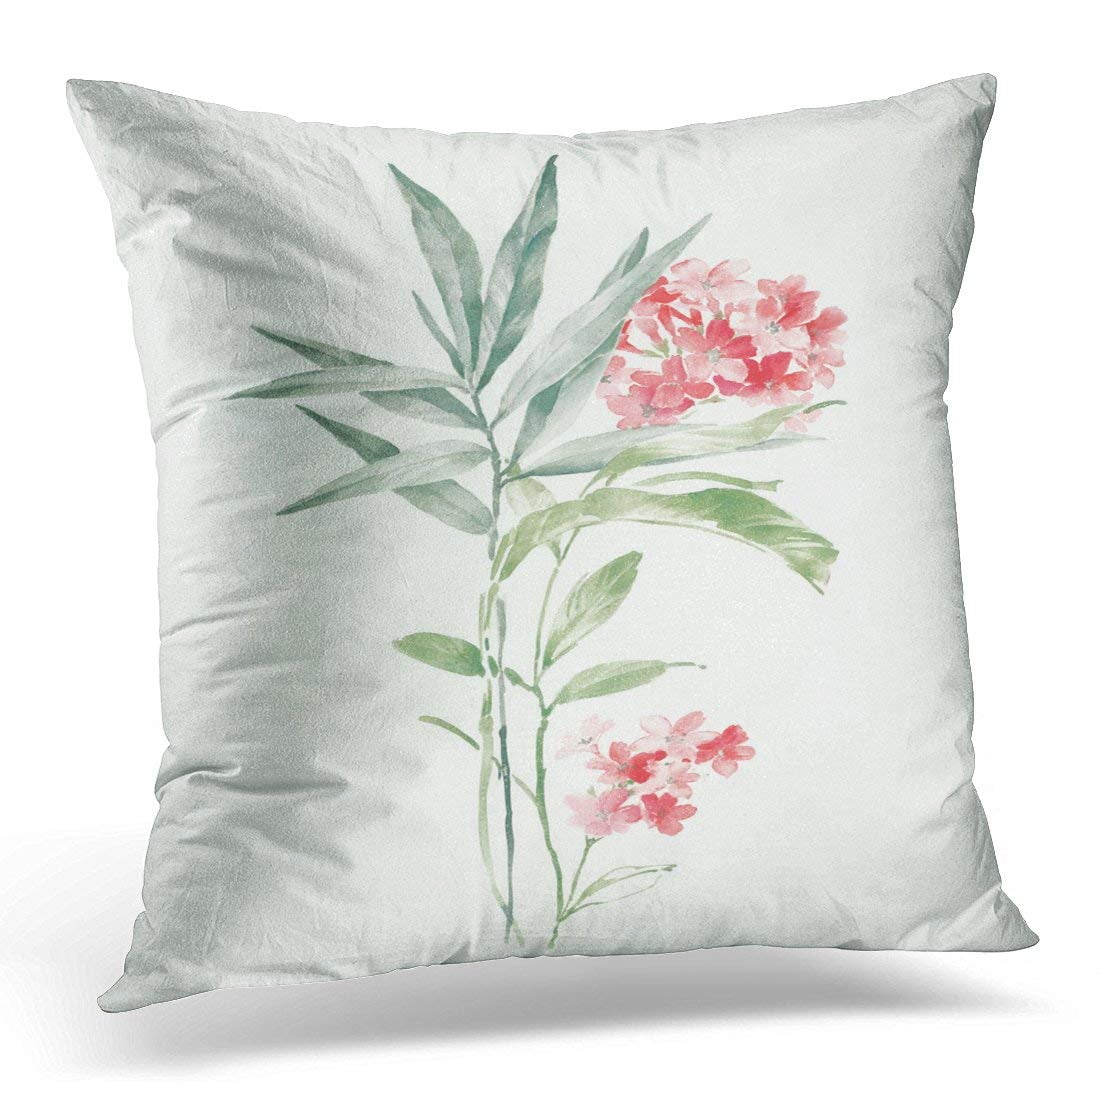 16x16 Multicolor Papa Merch Designs Birds and Flowers Retro Themed Throw Pillow 